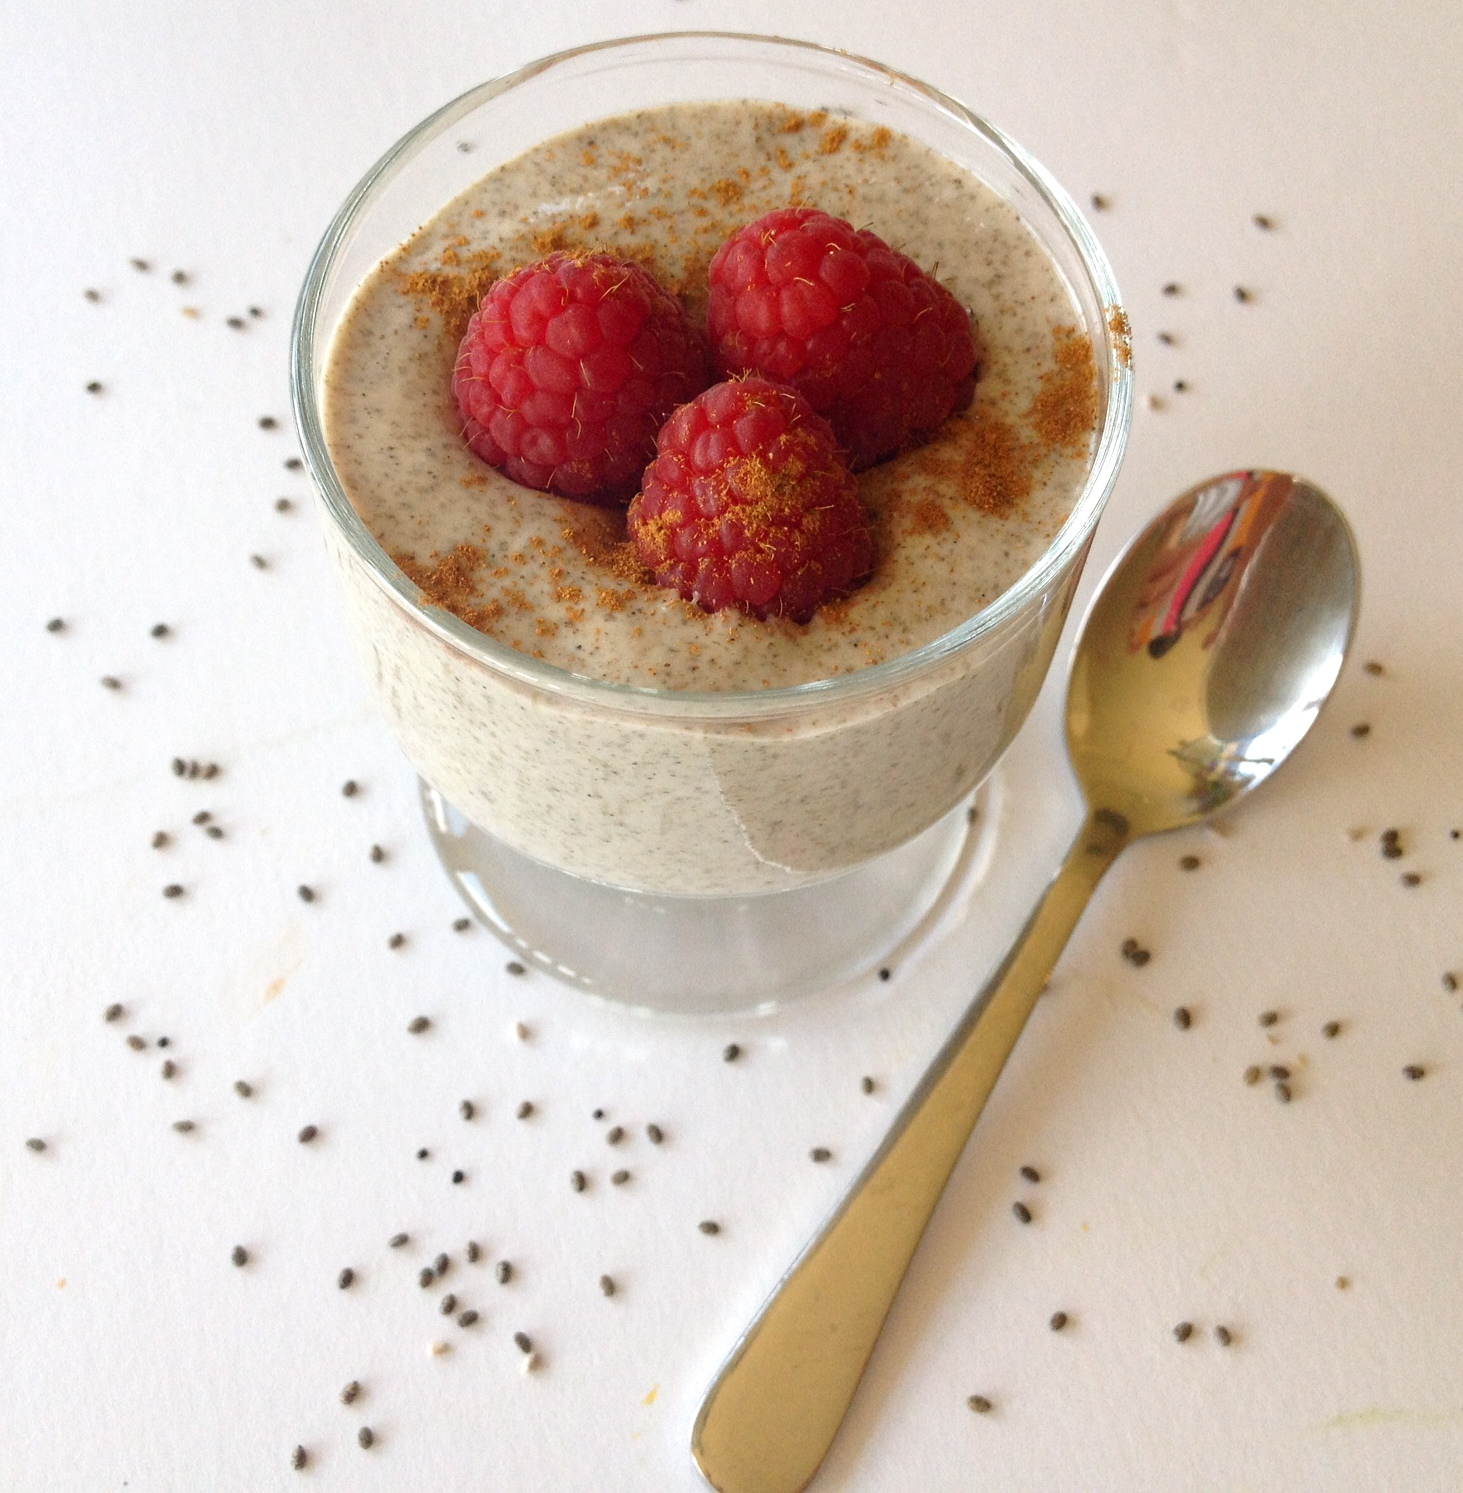 Meatless Monday – Creamy Chia Seed Pudding